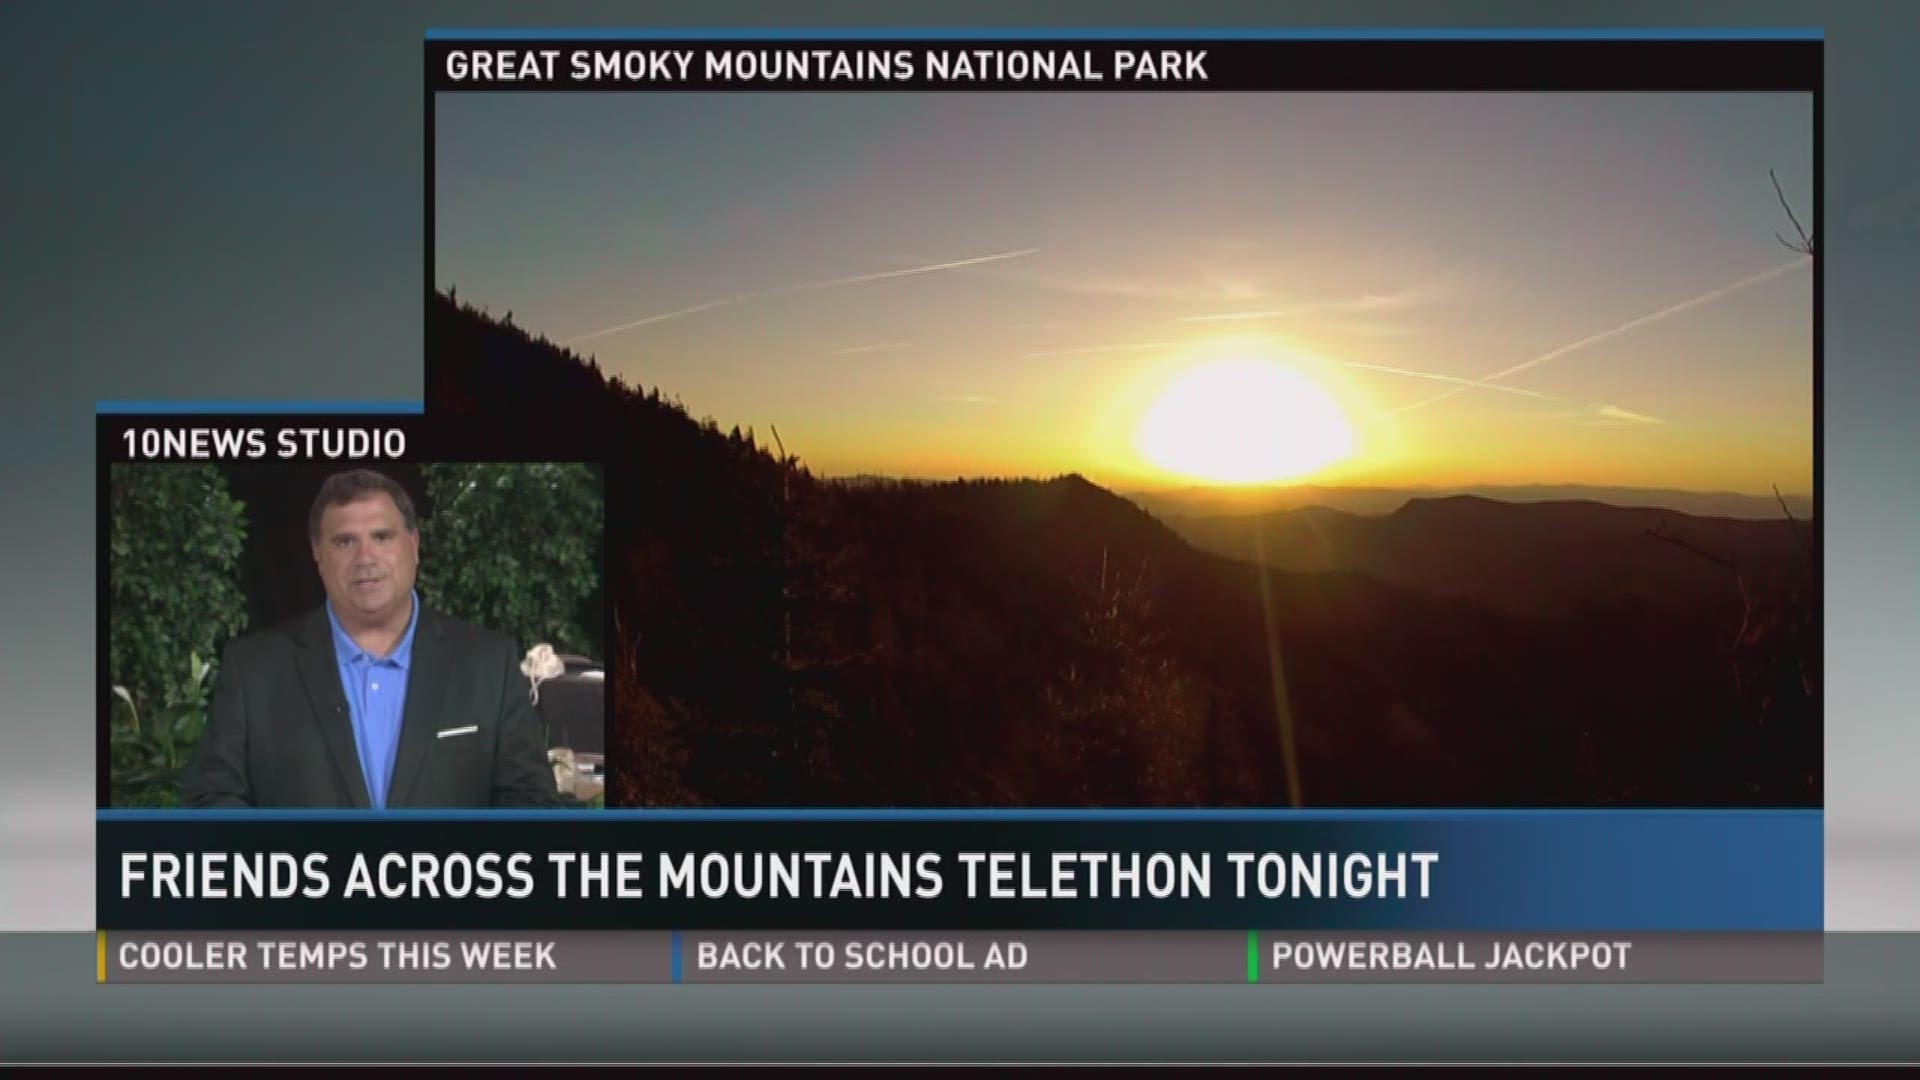 The telethon will raise money to fund a new emergency communications system for the Great Smoky Mountains National Park.